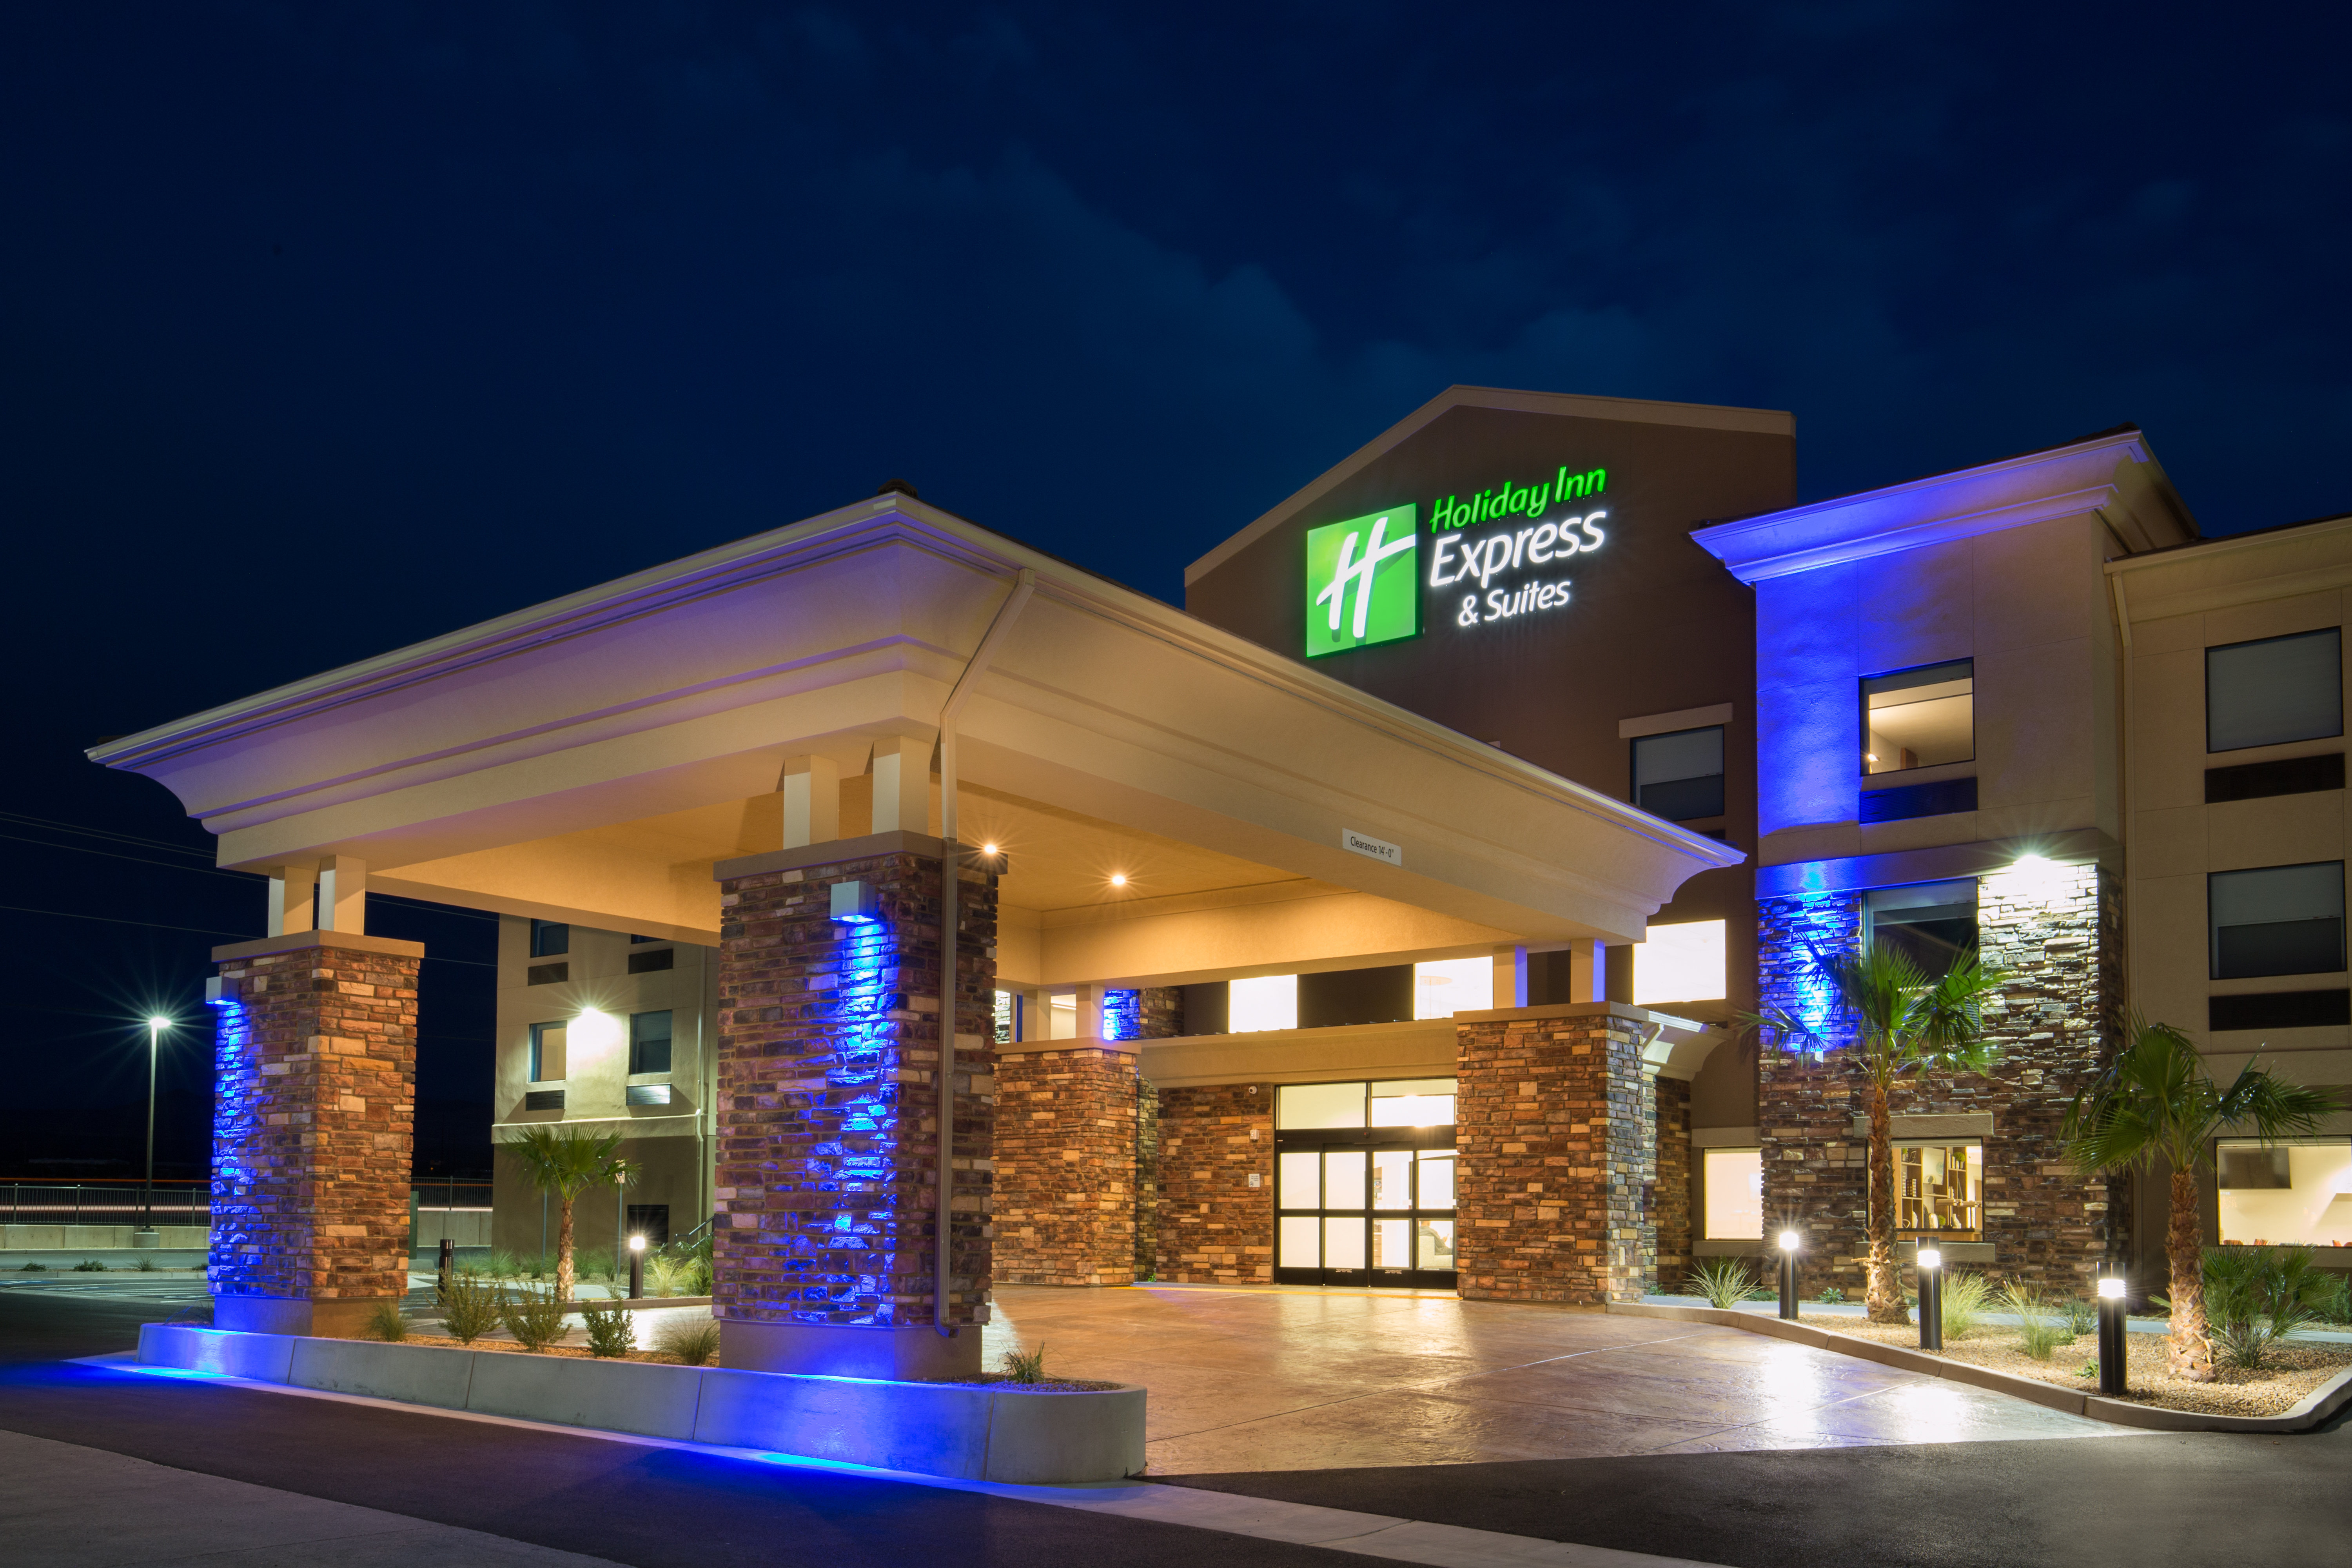 Chose our Pahrump, NV Holiday Inn Express's conventient location